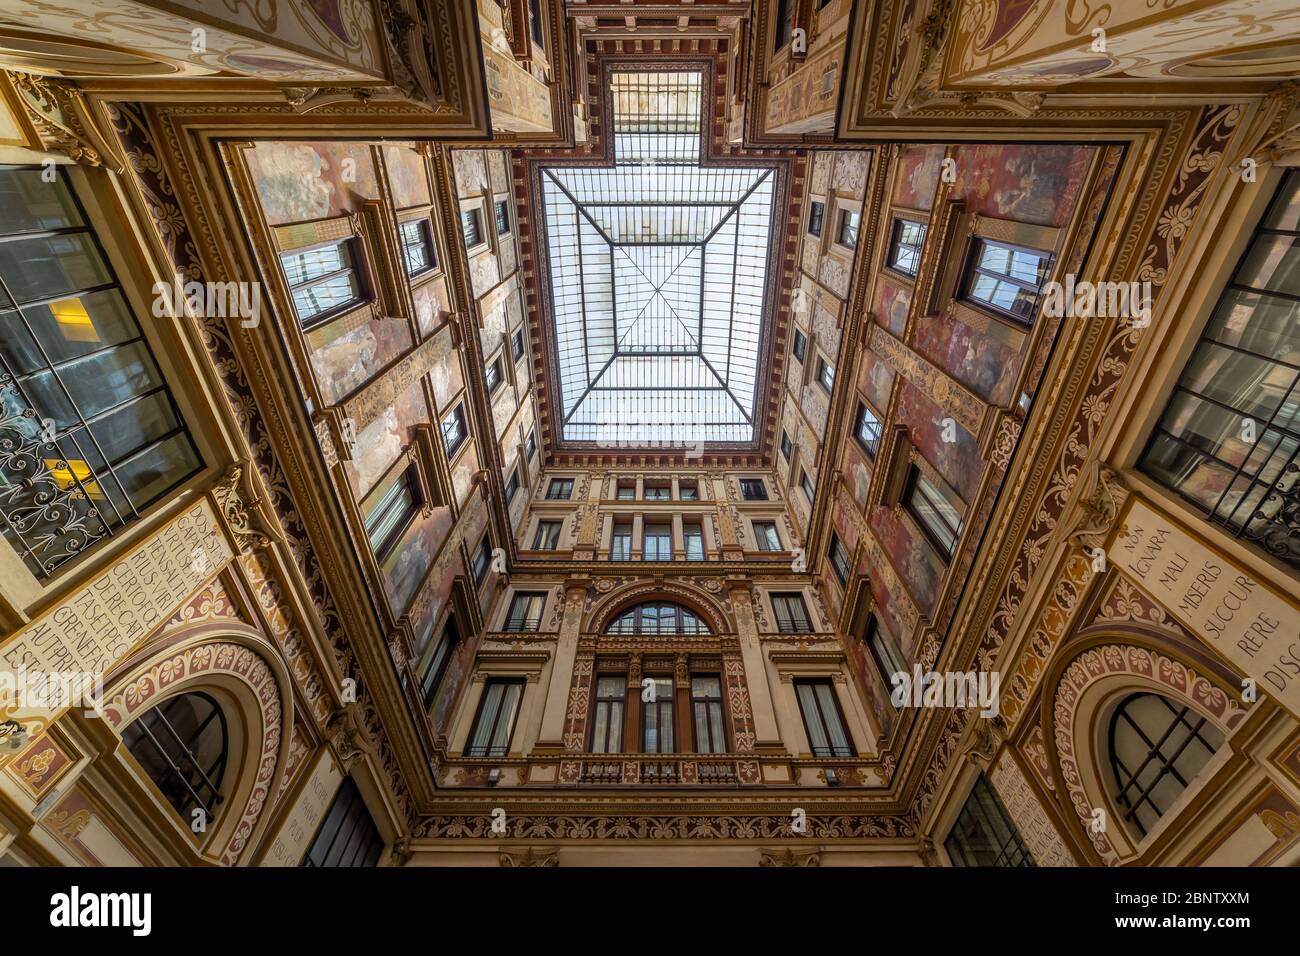 ROME, ITALY - AUGUST 14, 2019: Galleria Sciarra, built between 1885 and 1888 as a courtyard for the Palazzo Sciarra Colonna, in Rome, Italy Stock Photo